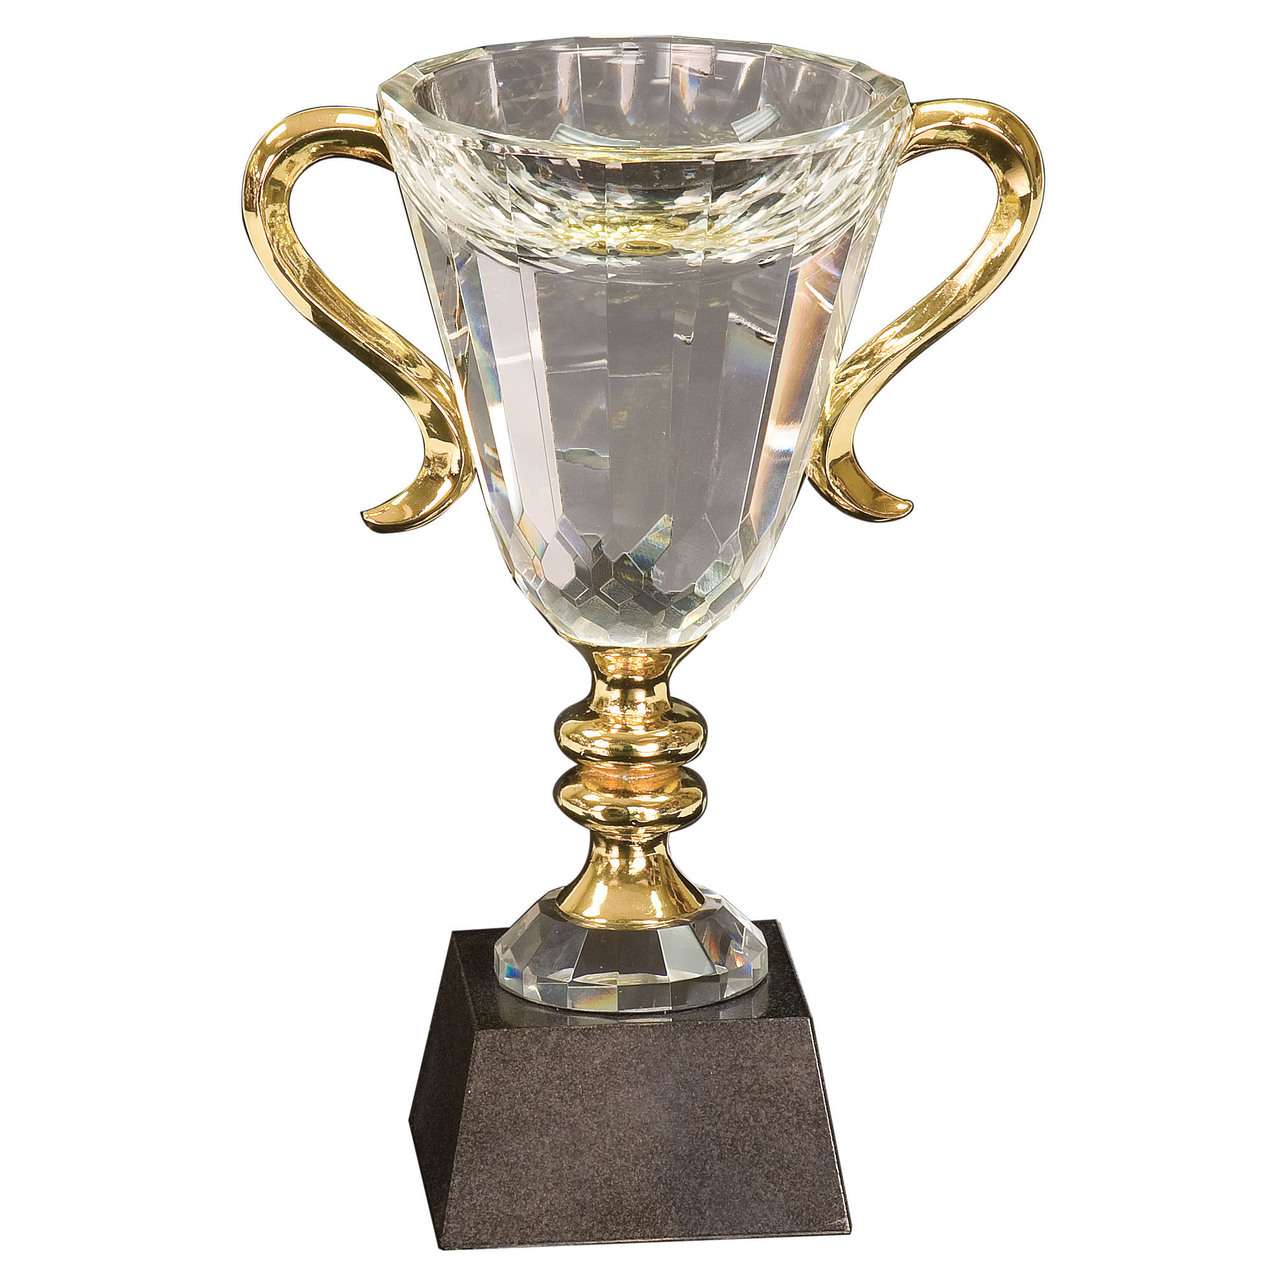 https://cdn11.bigcommerce.com/s-aub1q7pn32/images/stencil/original/products/16551/60576/Cup-Trophy-Crystal-Gold-Crystal-Cup-Award-with-Scroll-Handles-Award-75-85-or-10-Inch-Tall-CRY039-P-Decade-Awards_45973__61006.1691985025.jpg?c=2